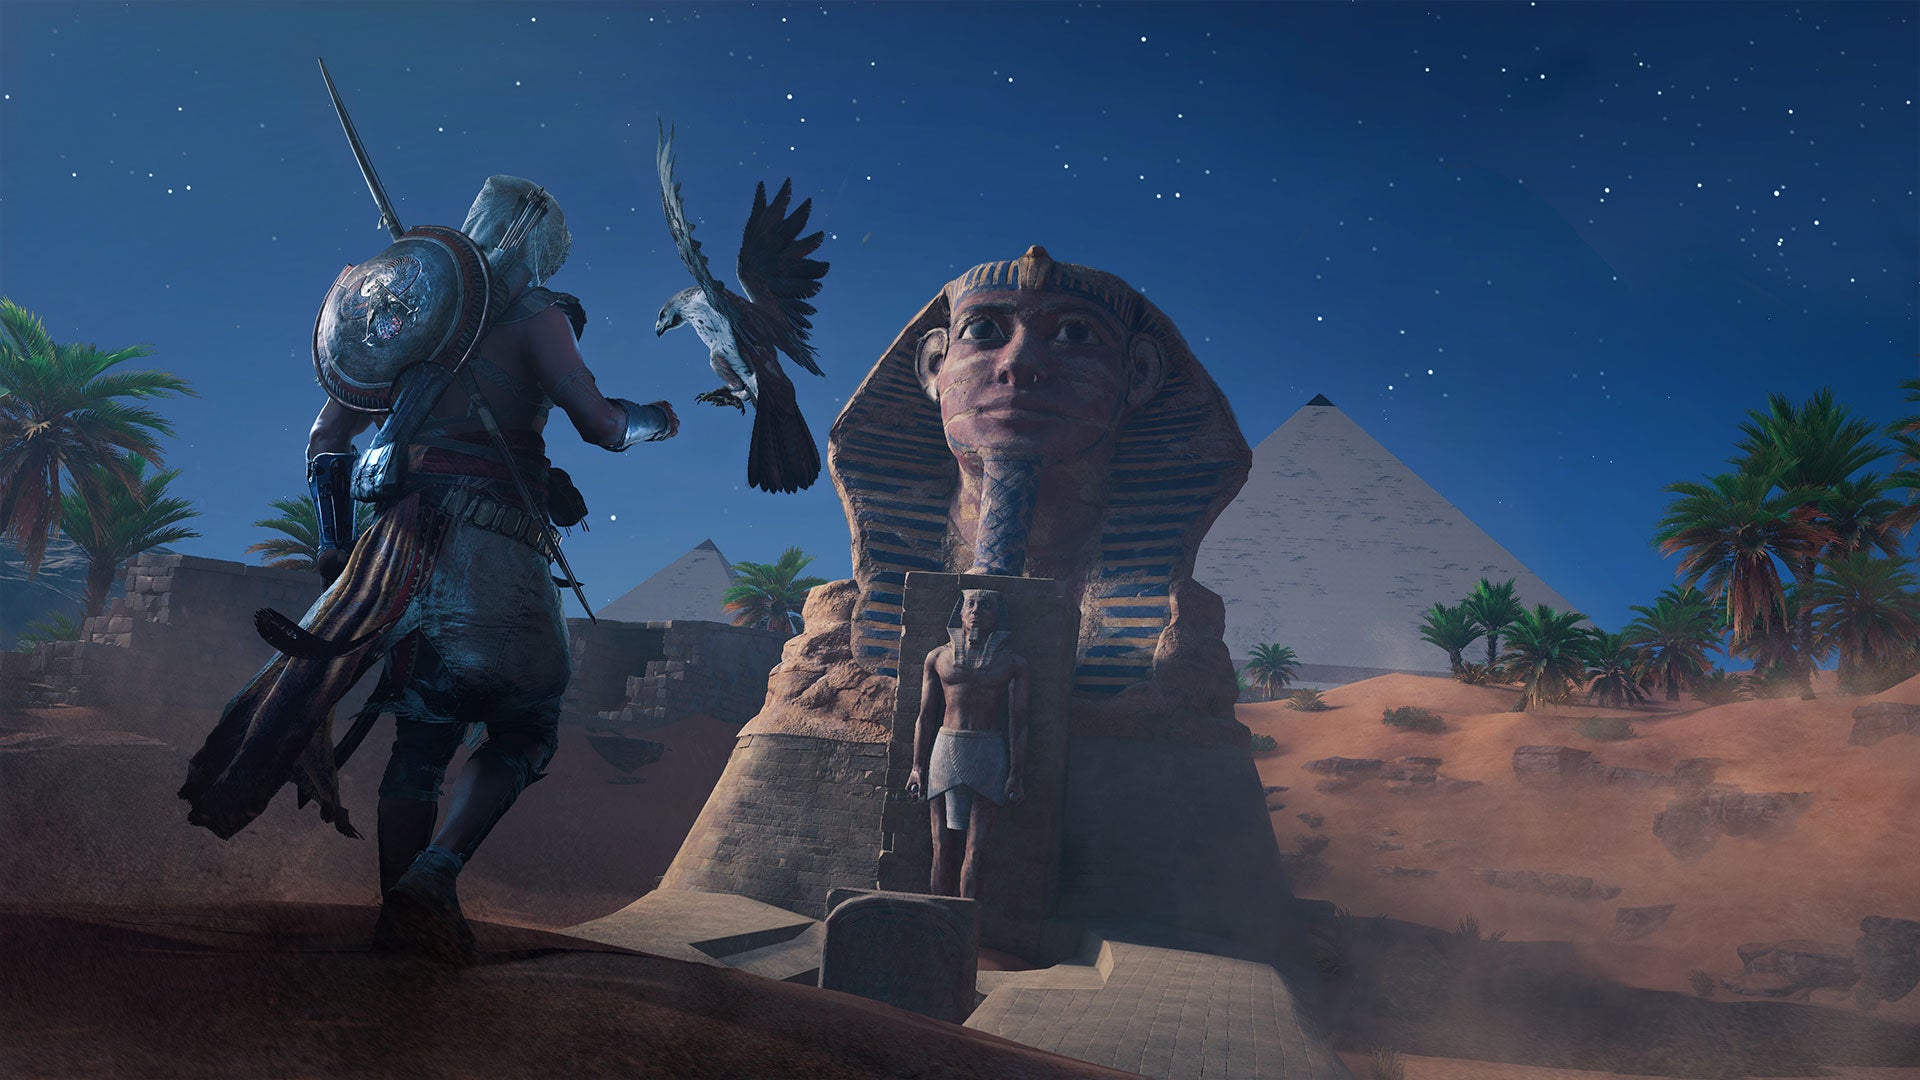 honning parallel afbrudt Assassin's Creed Origins guide: tips, hints and walkthroughs for your  Egyptian adventures | VG247